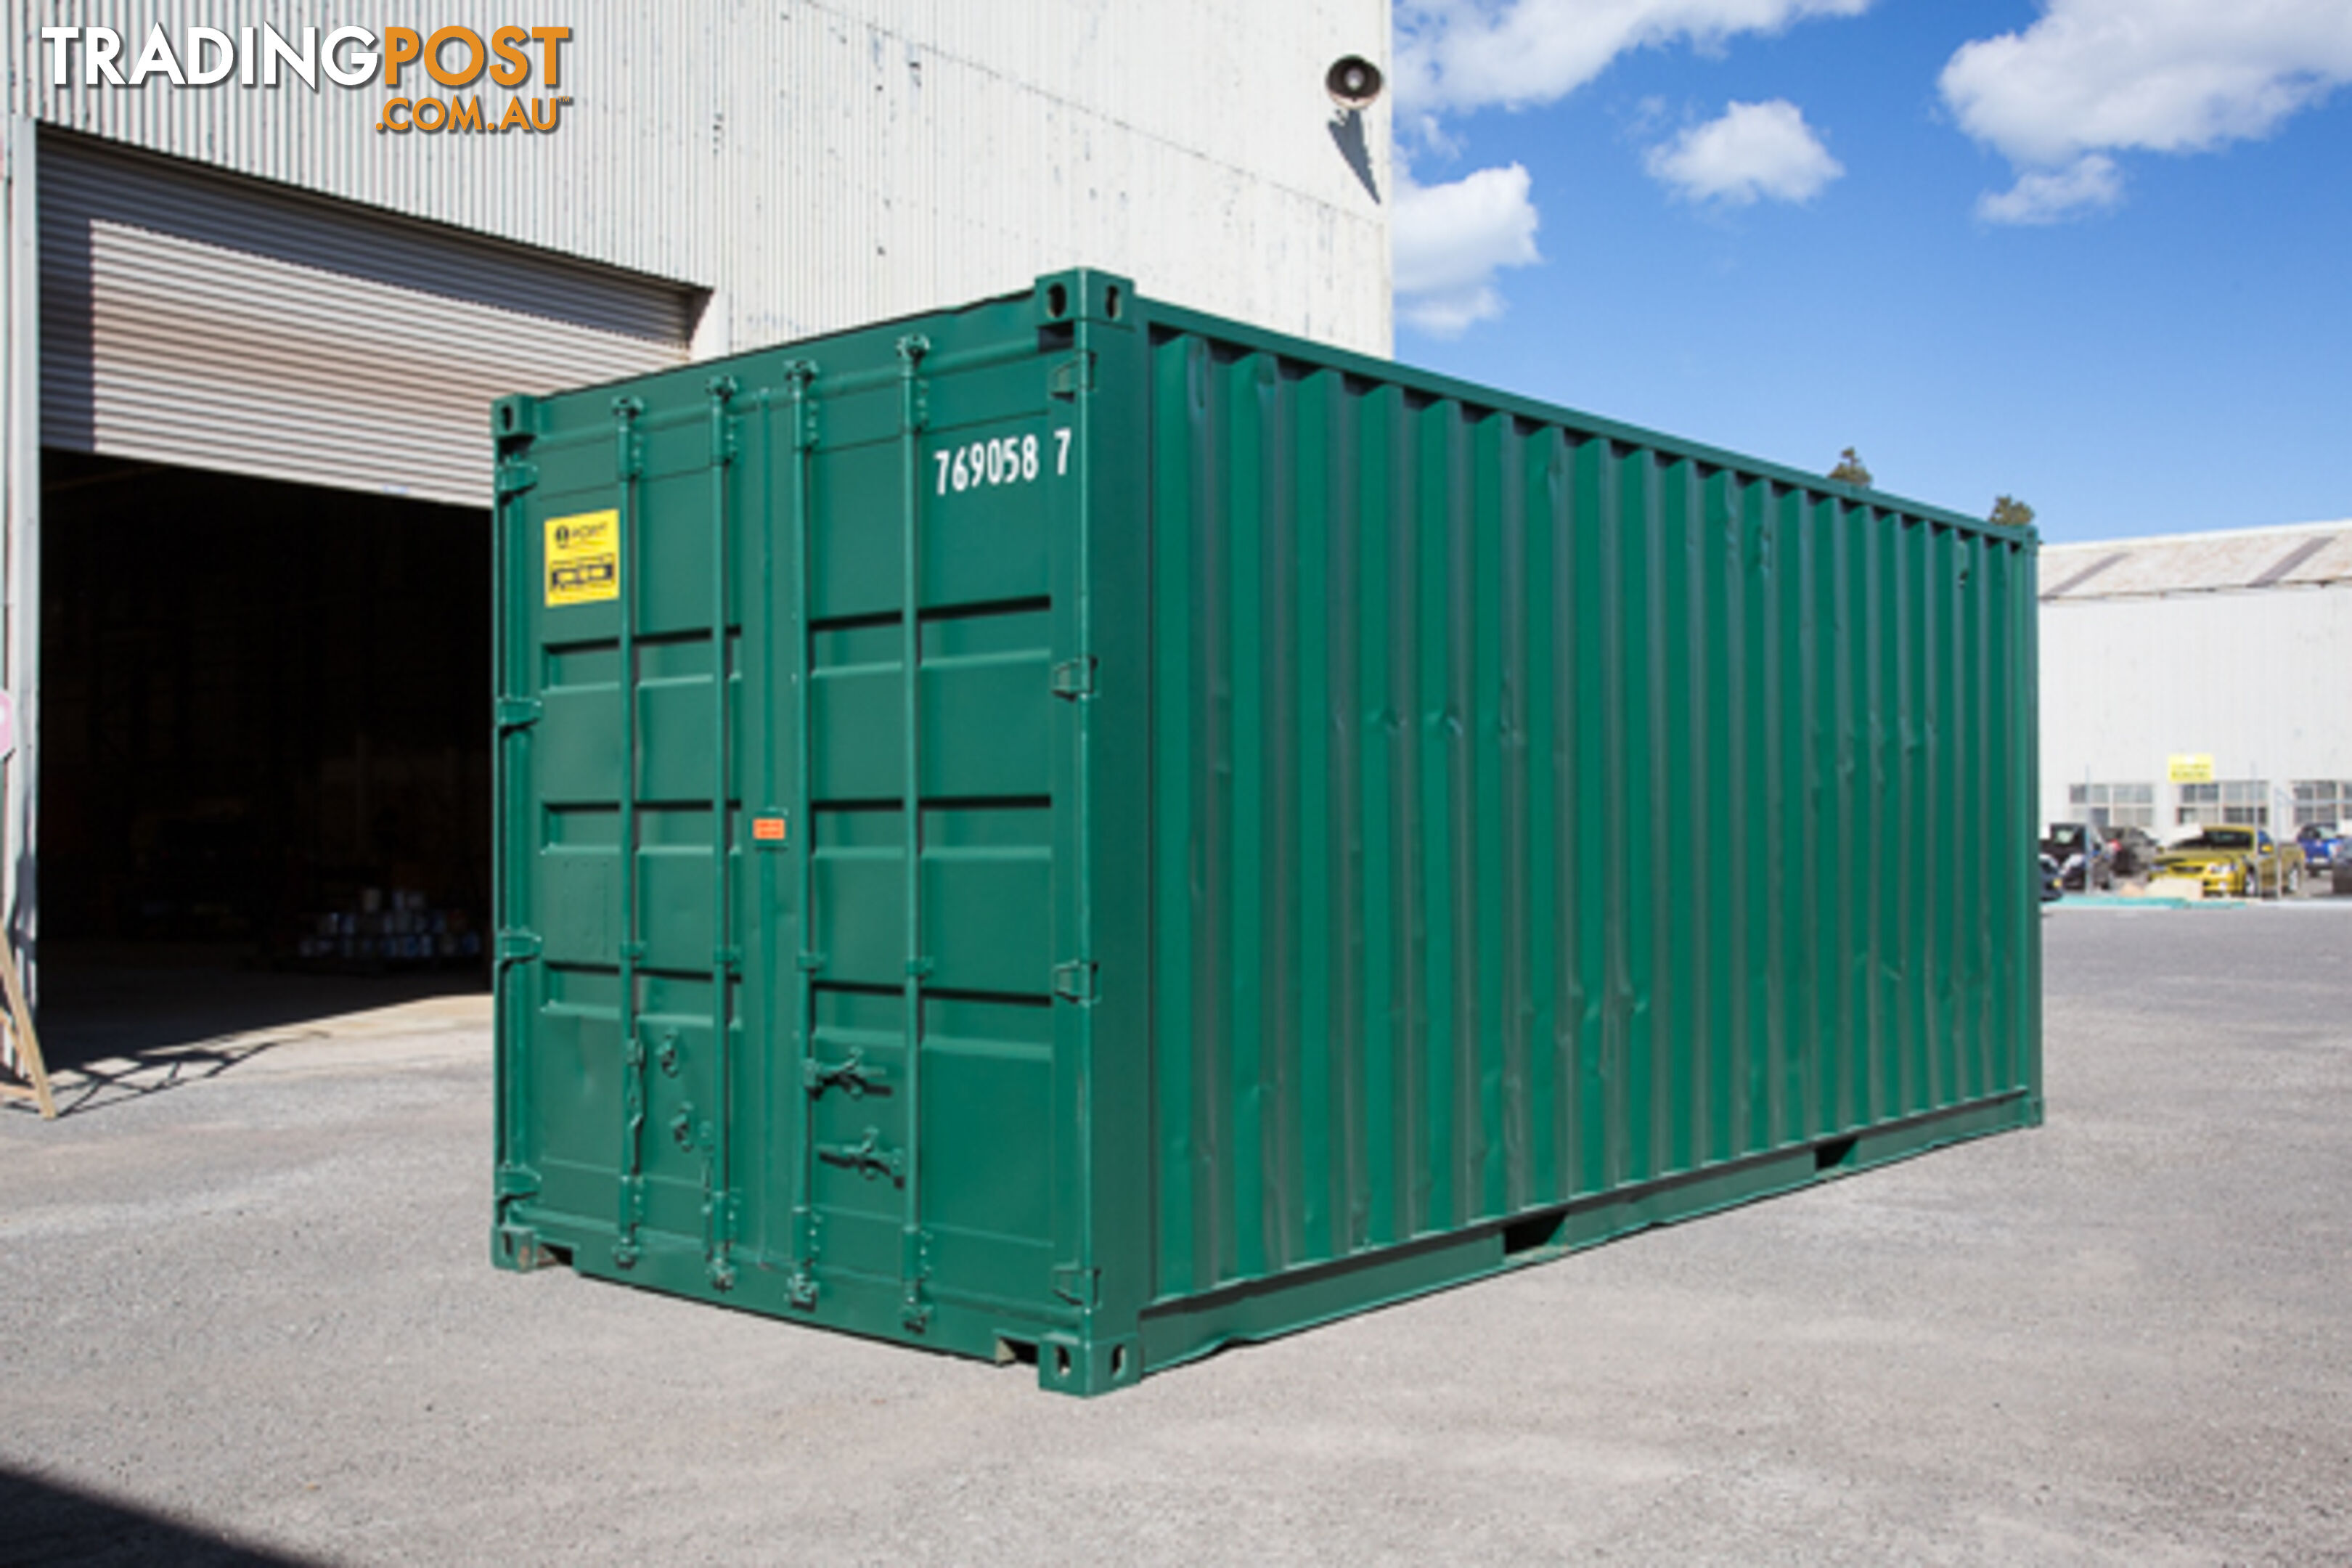 Refurbished Painted 20ft Shipping Containers Port Augusta - From $4500 + GST